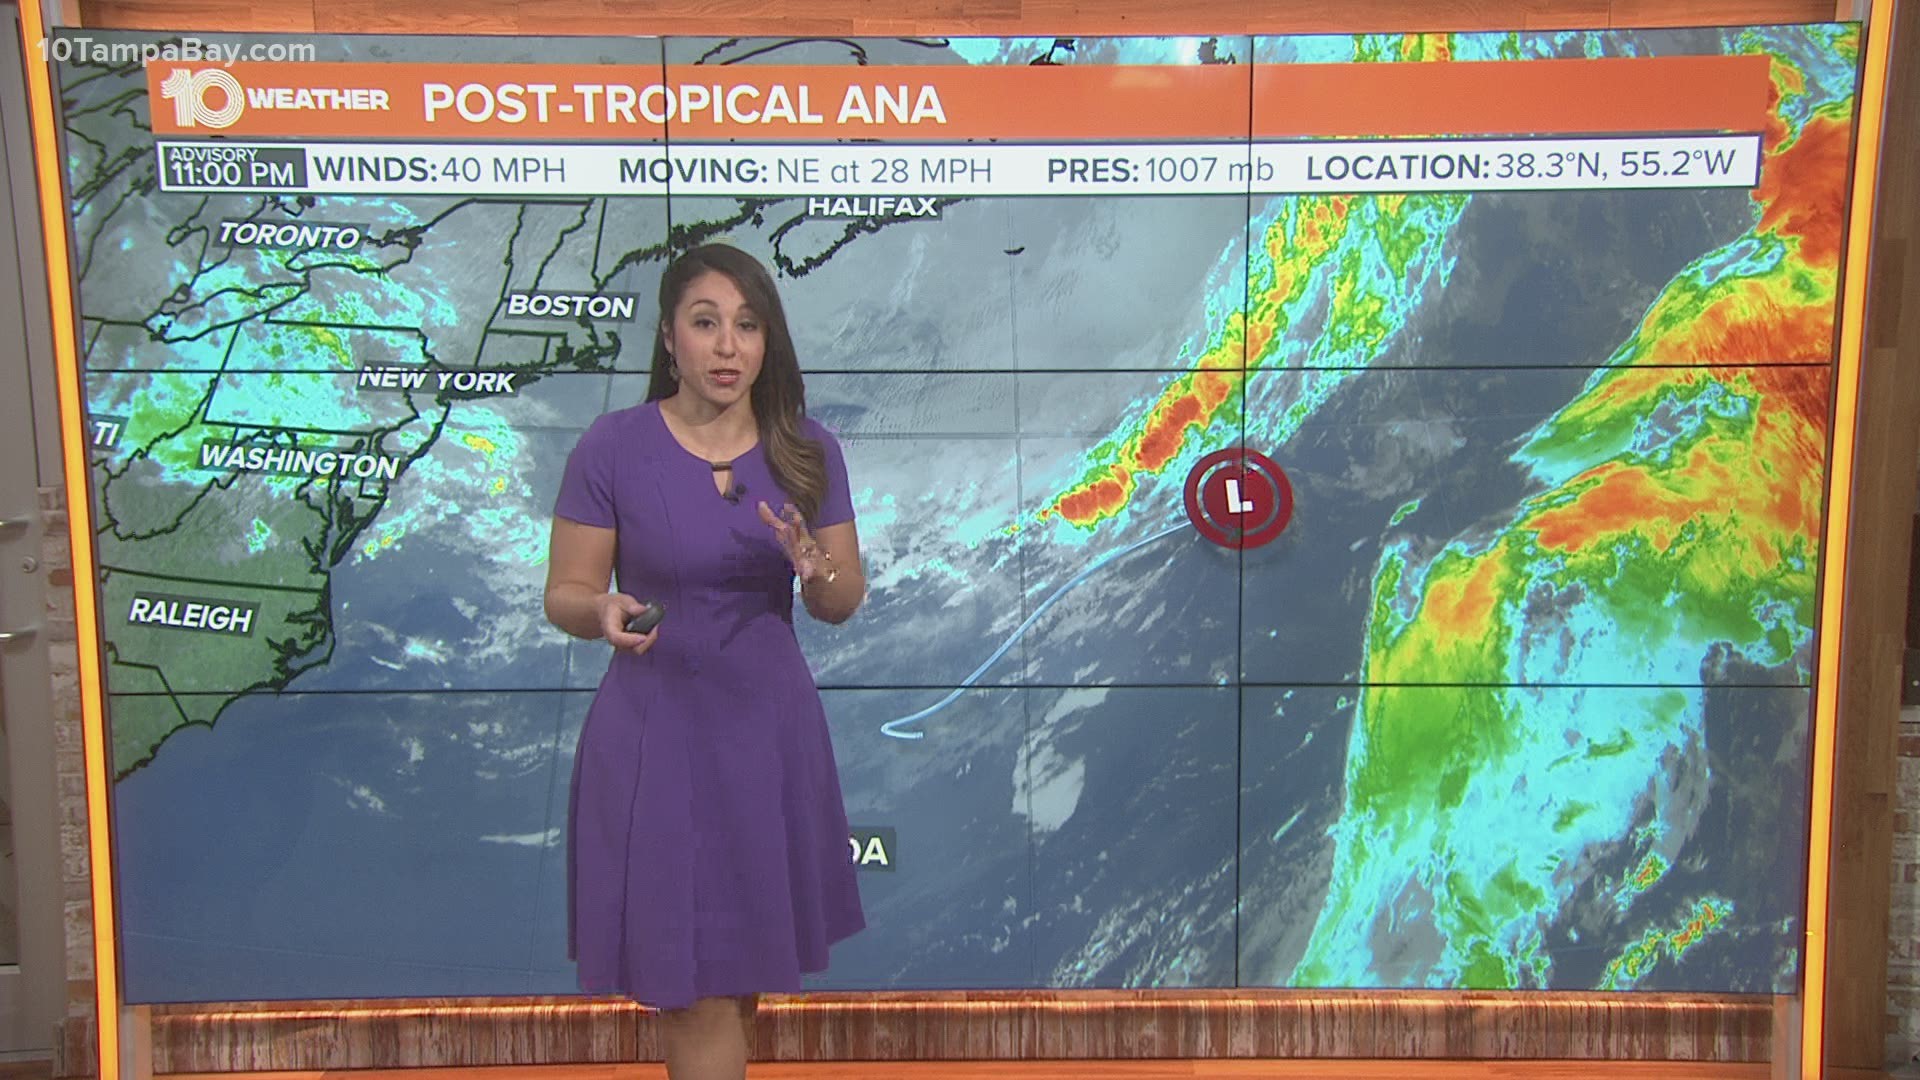 Ana is now considered post-tropical as it continues to head out into open water.